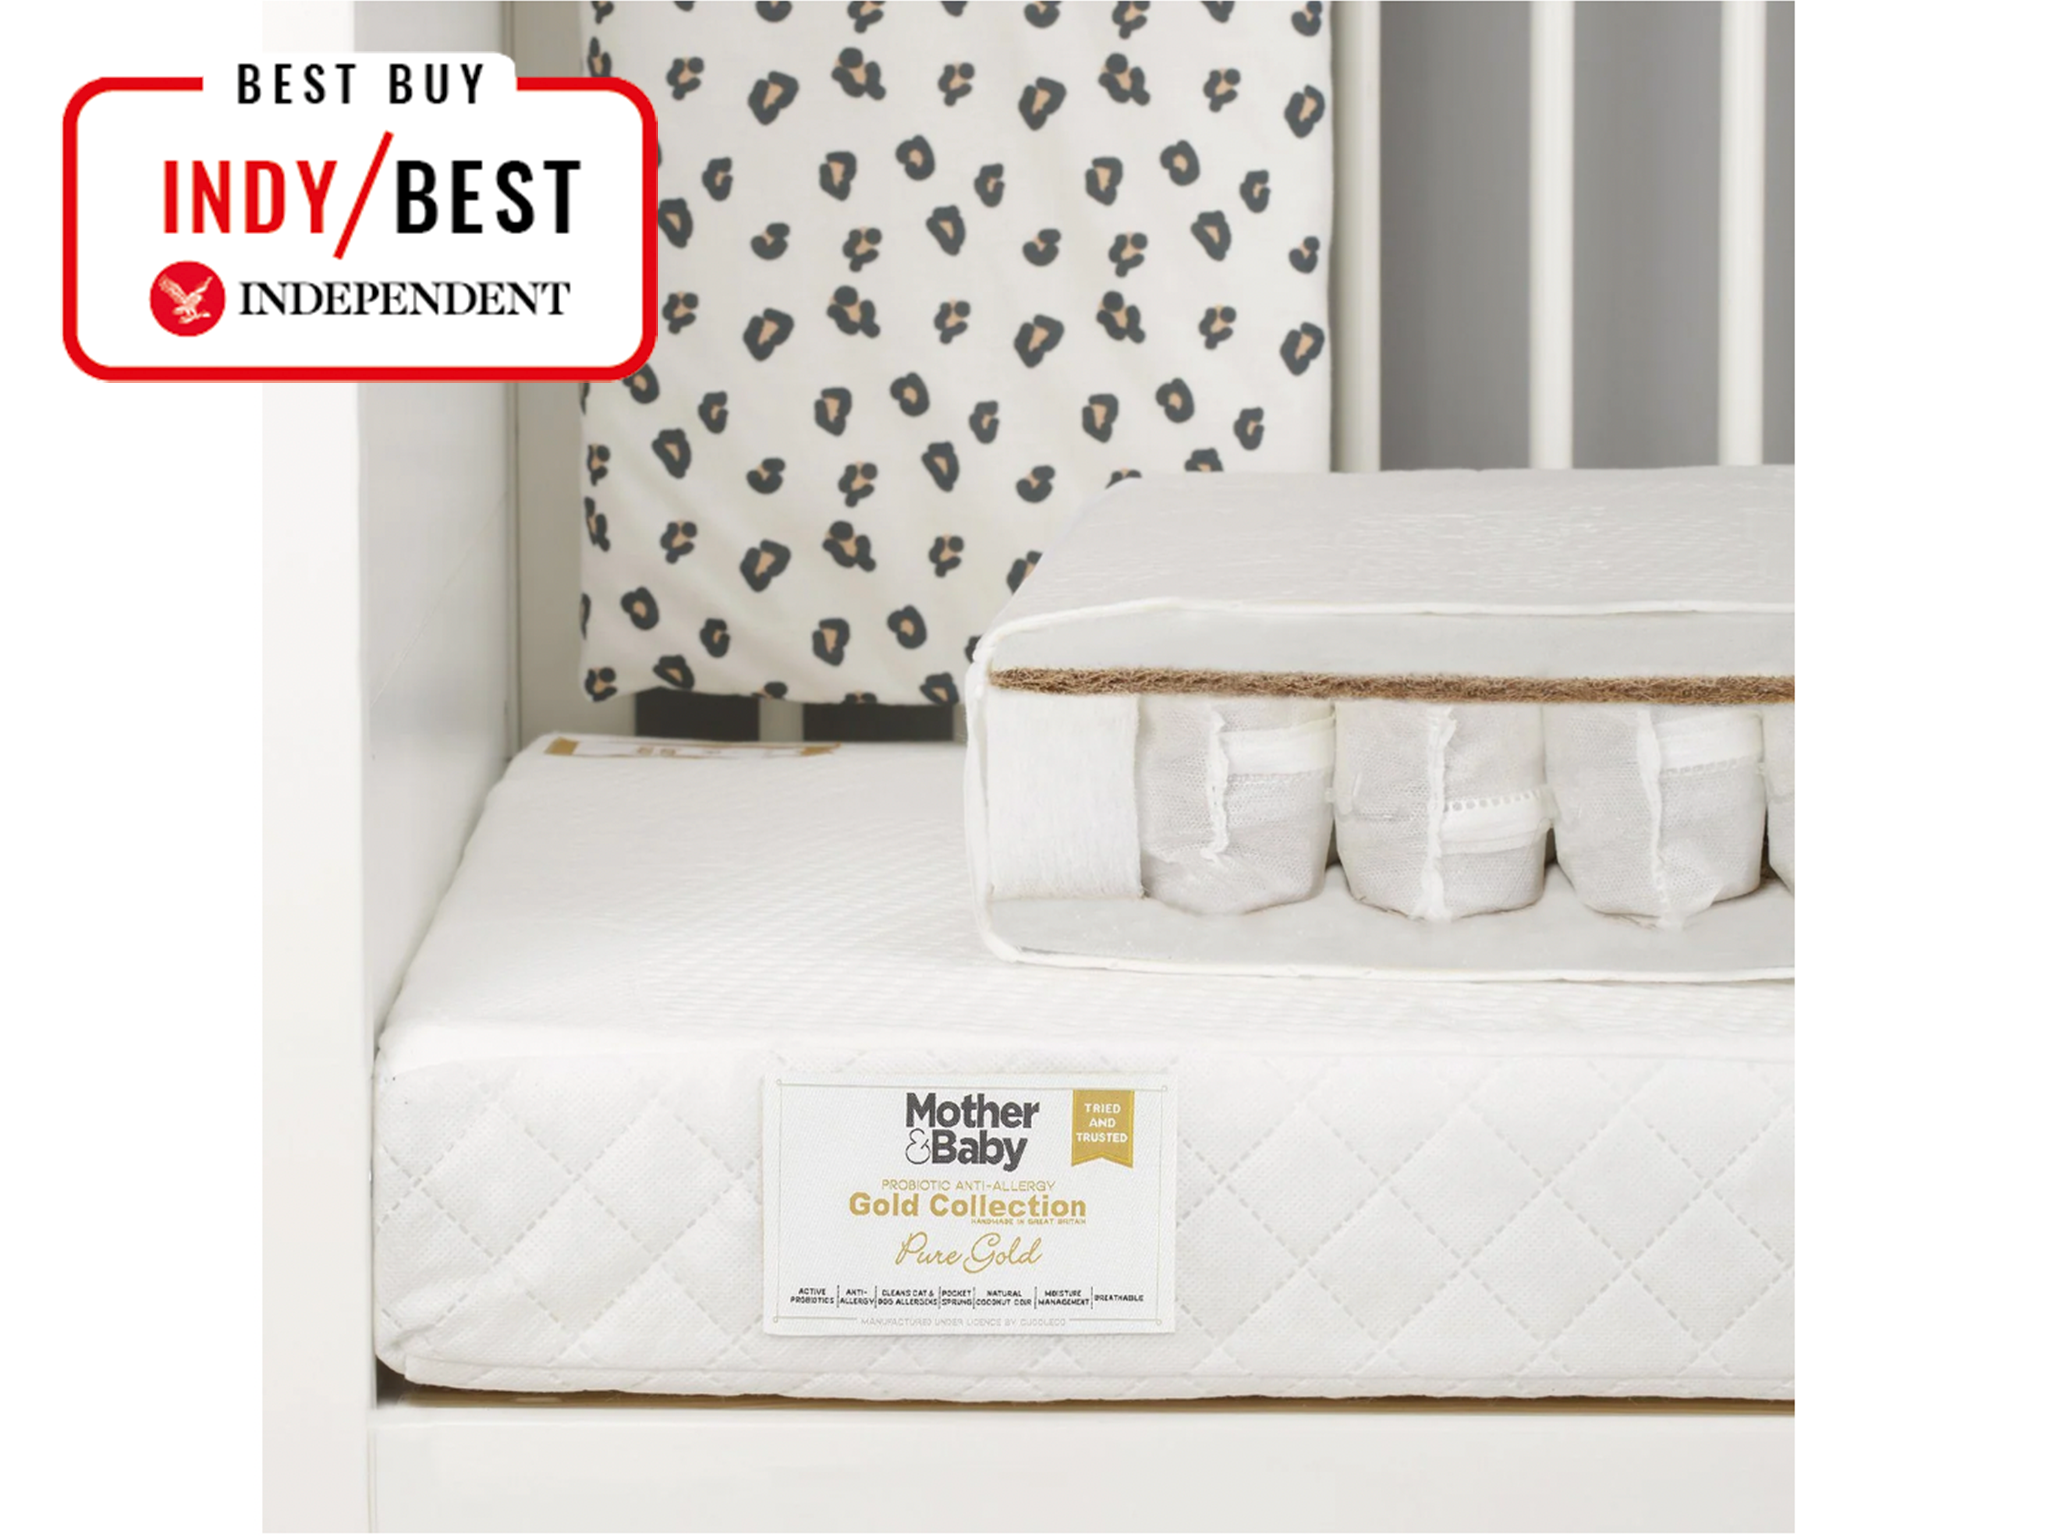 Mother&Baby pure gold anti-allergy coir pocket sprung cot bed mattress